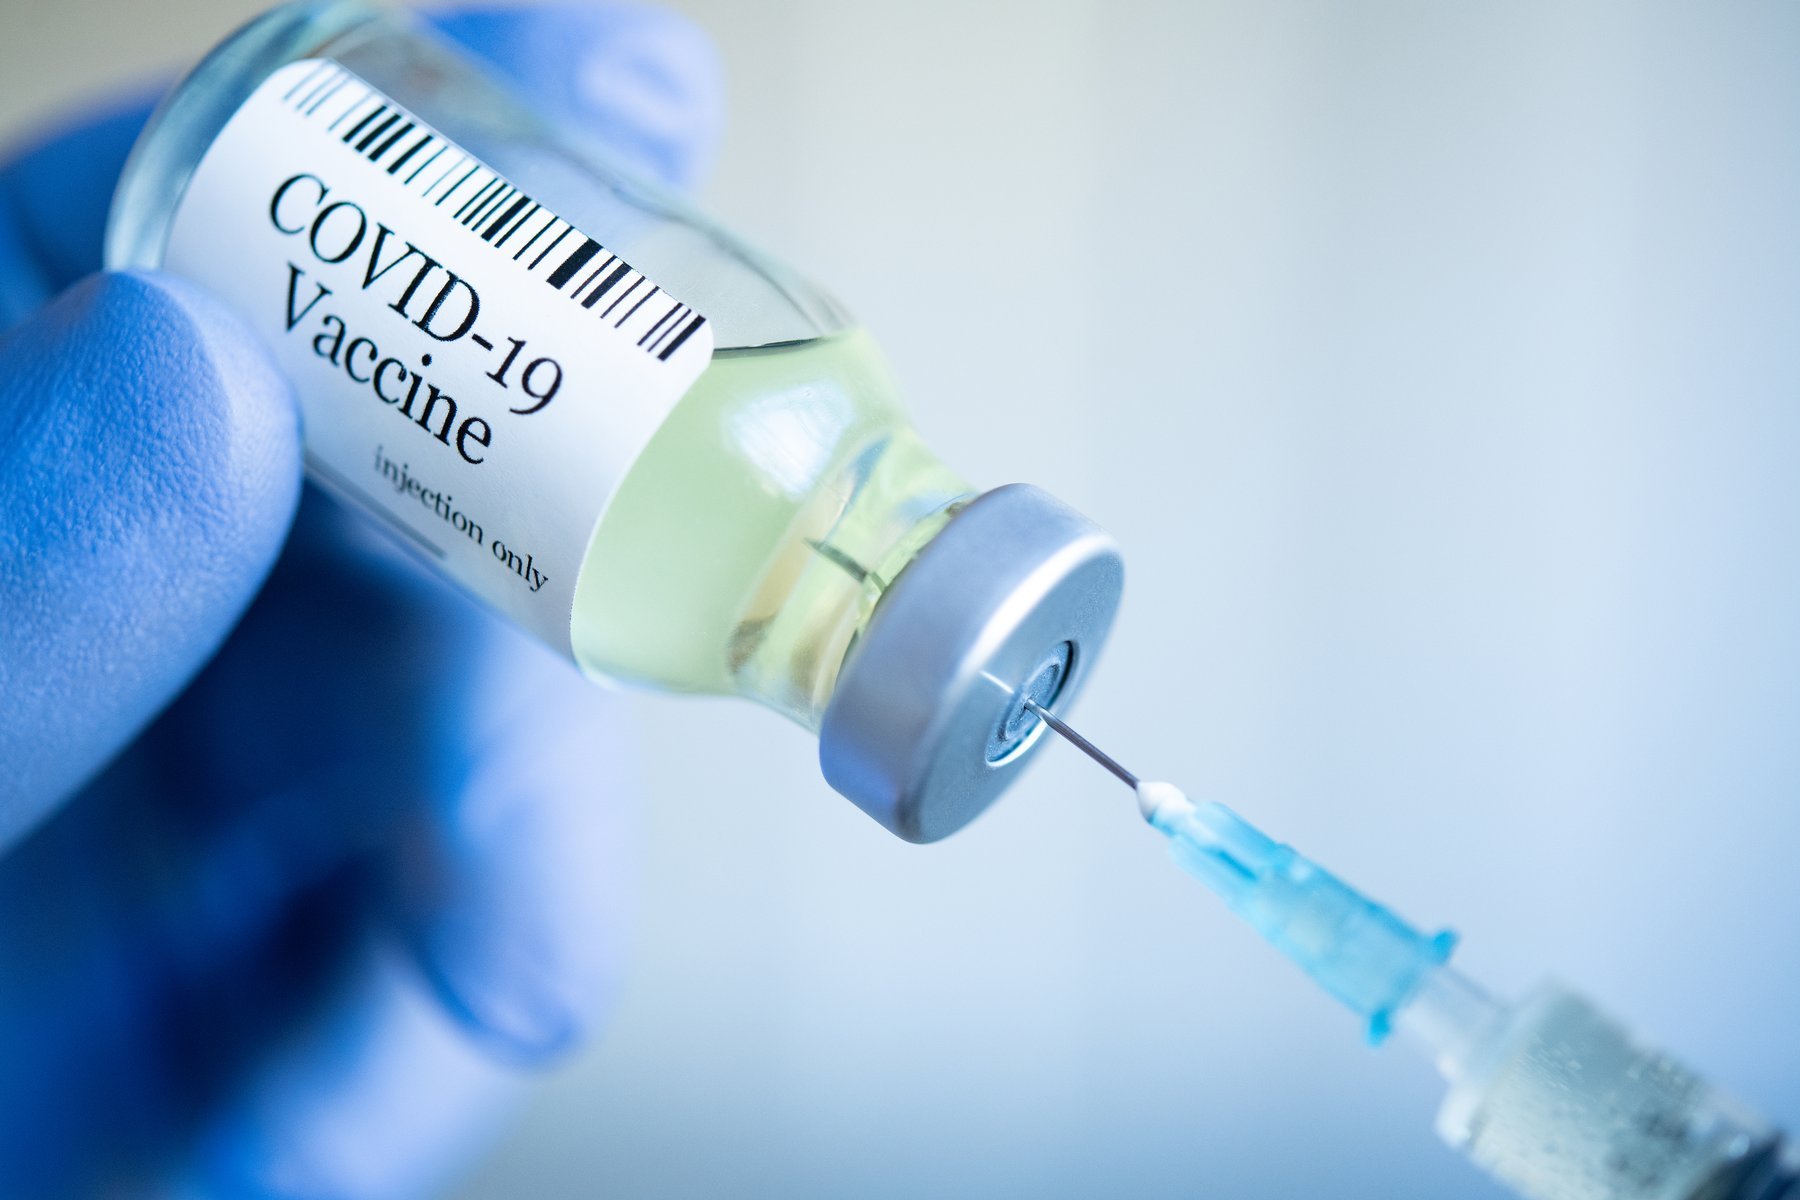 Photo of a COVID vaccine, after an advisory panel for the U.S. Food and Drug Administration (FDA) voted to recommend emergency use authorization for Pfizer and BioNTech’s vaccine in the United States. (Photo credit: Getty Images)